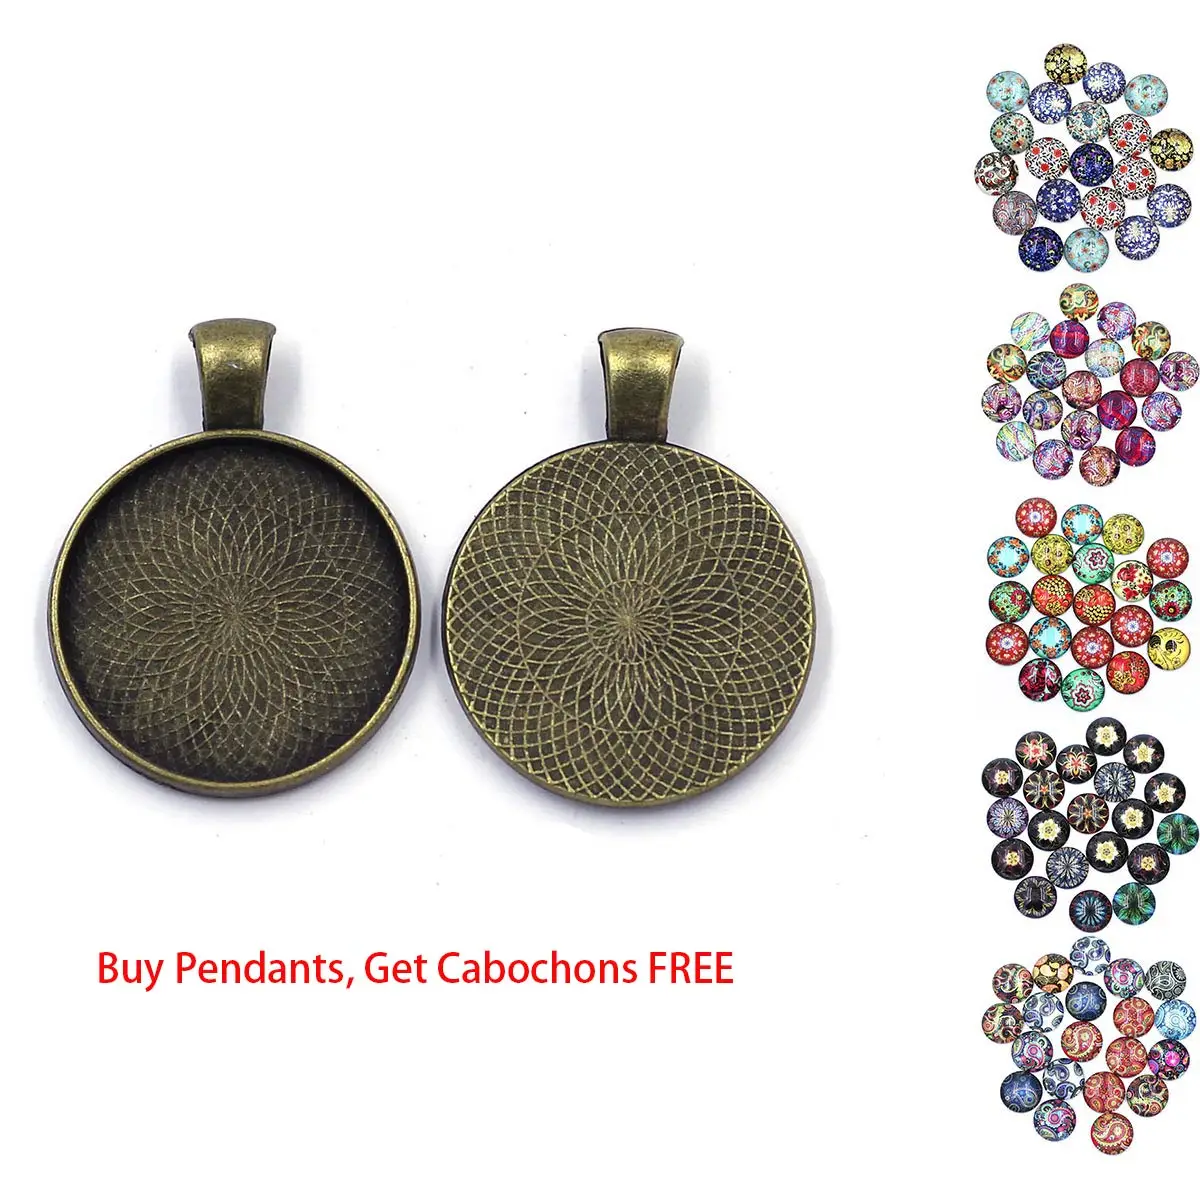 

15PCS Bronze Tone Charm Pendant Round Cameo Base Setting 36x27mm Fit Cabochon 25mm DIY Men Women Jewelry Crafts Accessories Gift